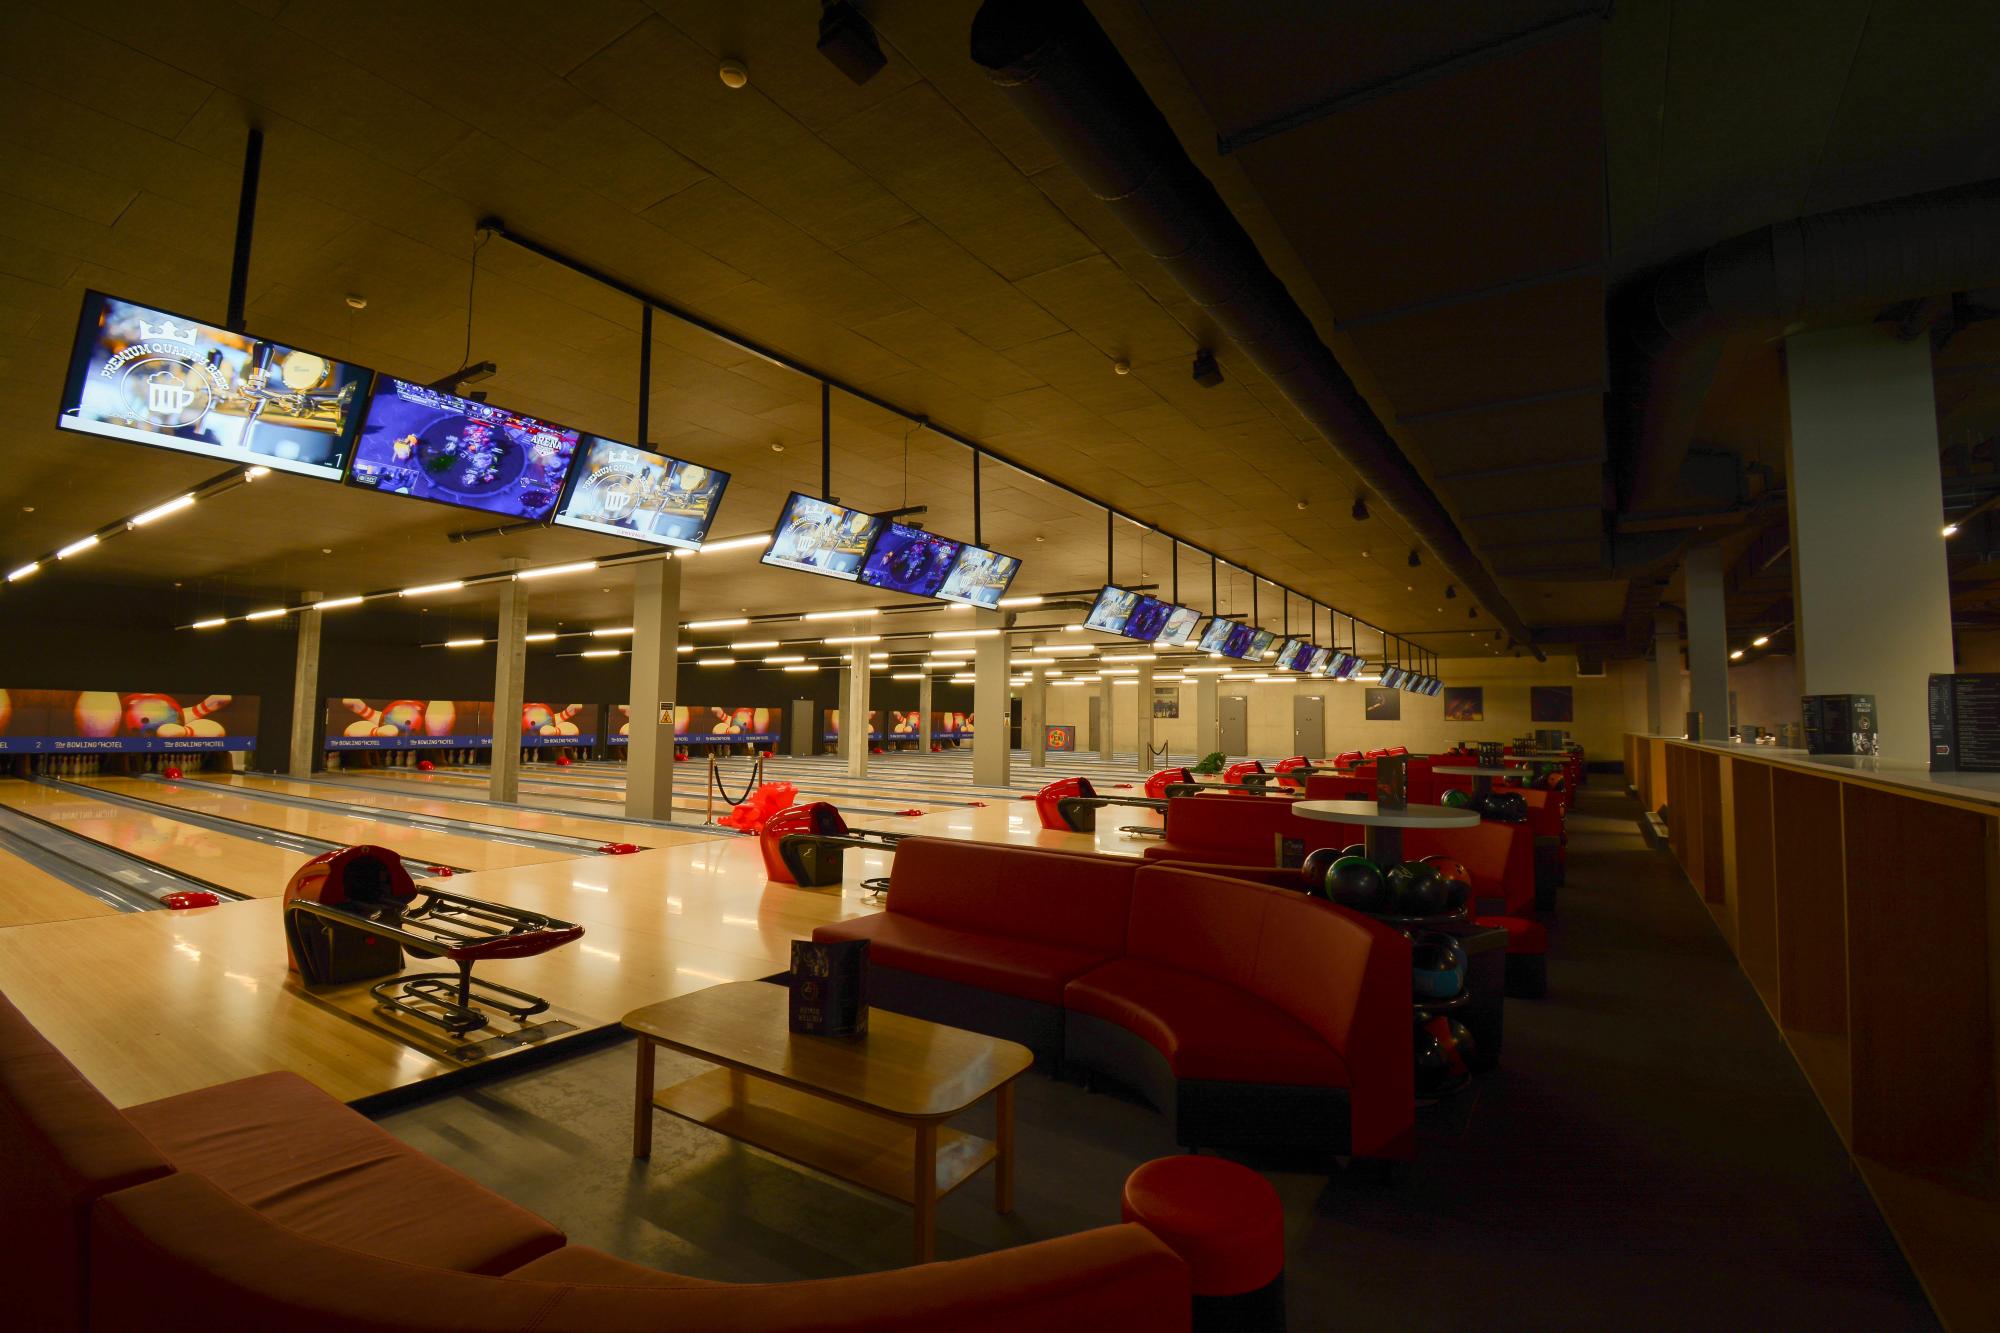 The Bowling hotel